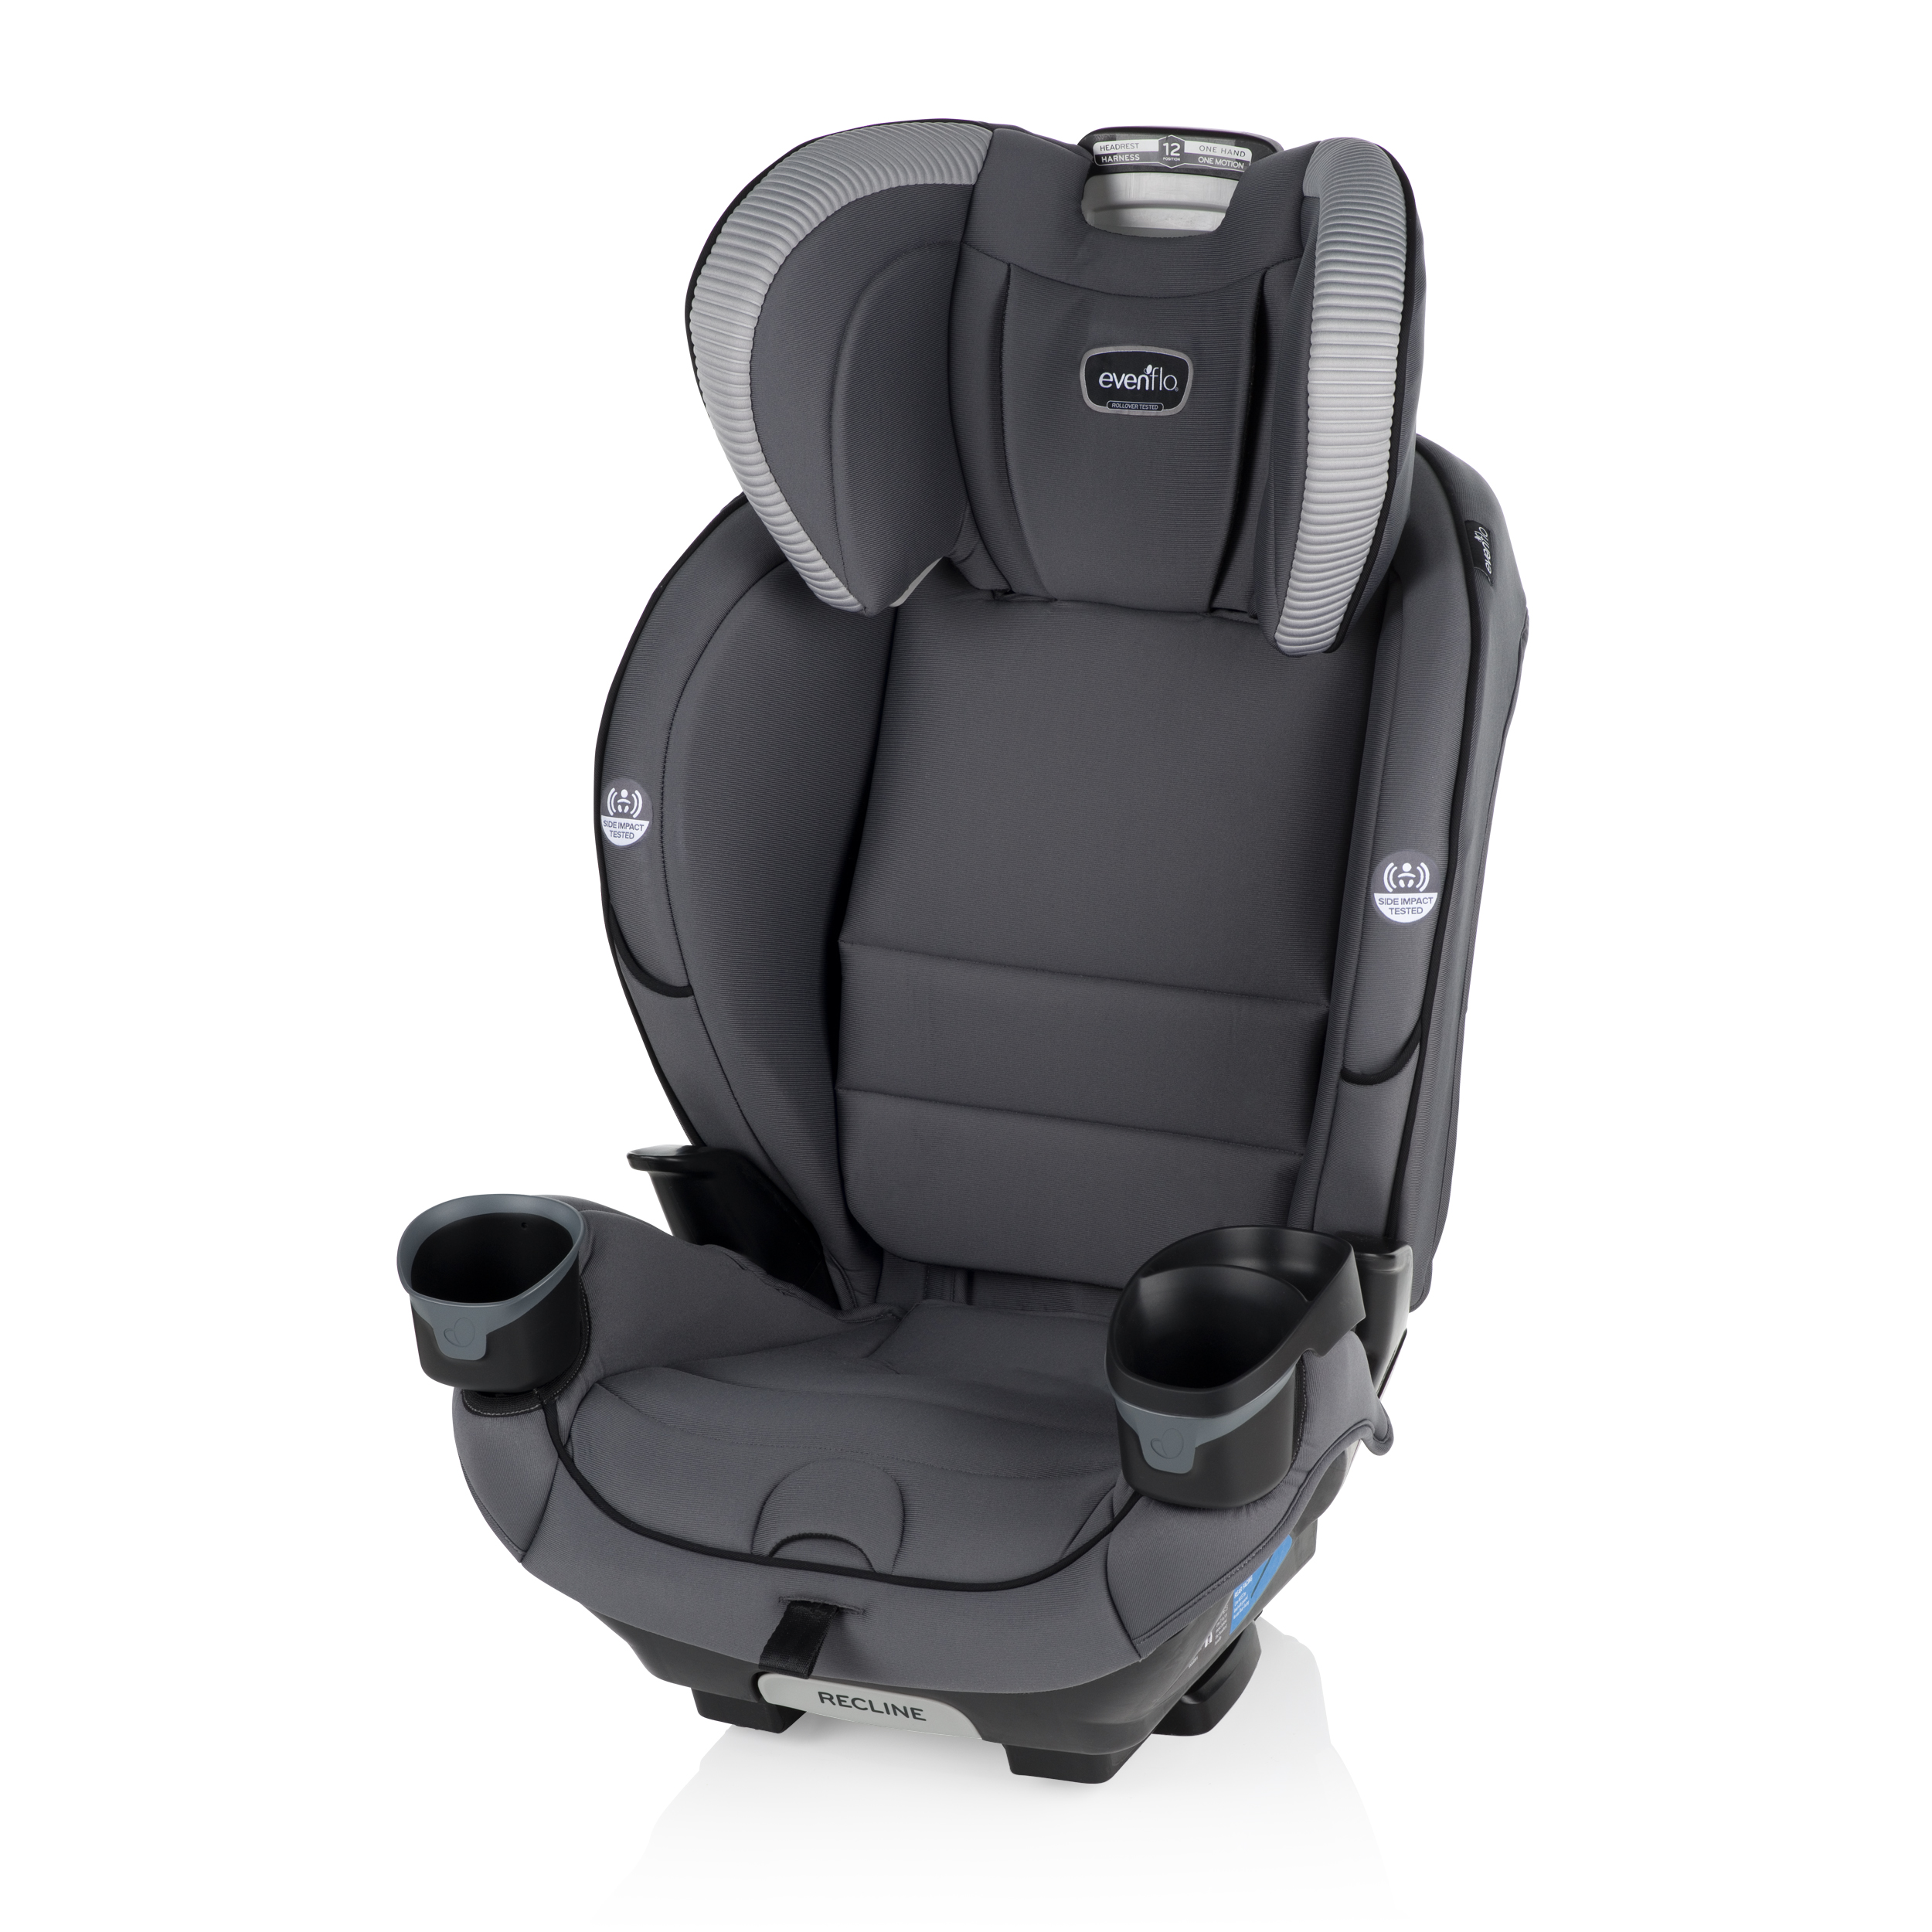 Evenflo Convertible Car Seat, EveryFit, 4in1, Sawyer Gray eBay